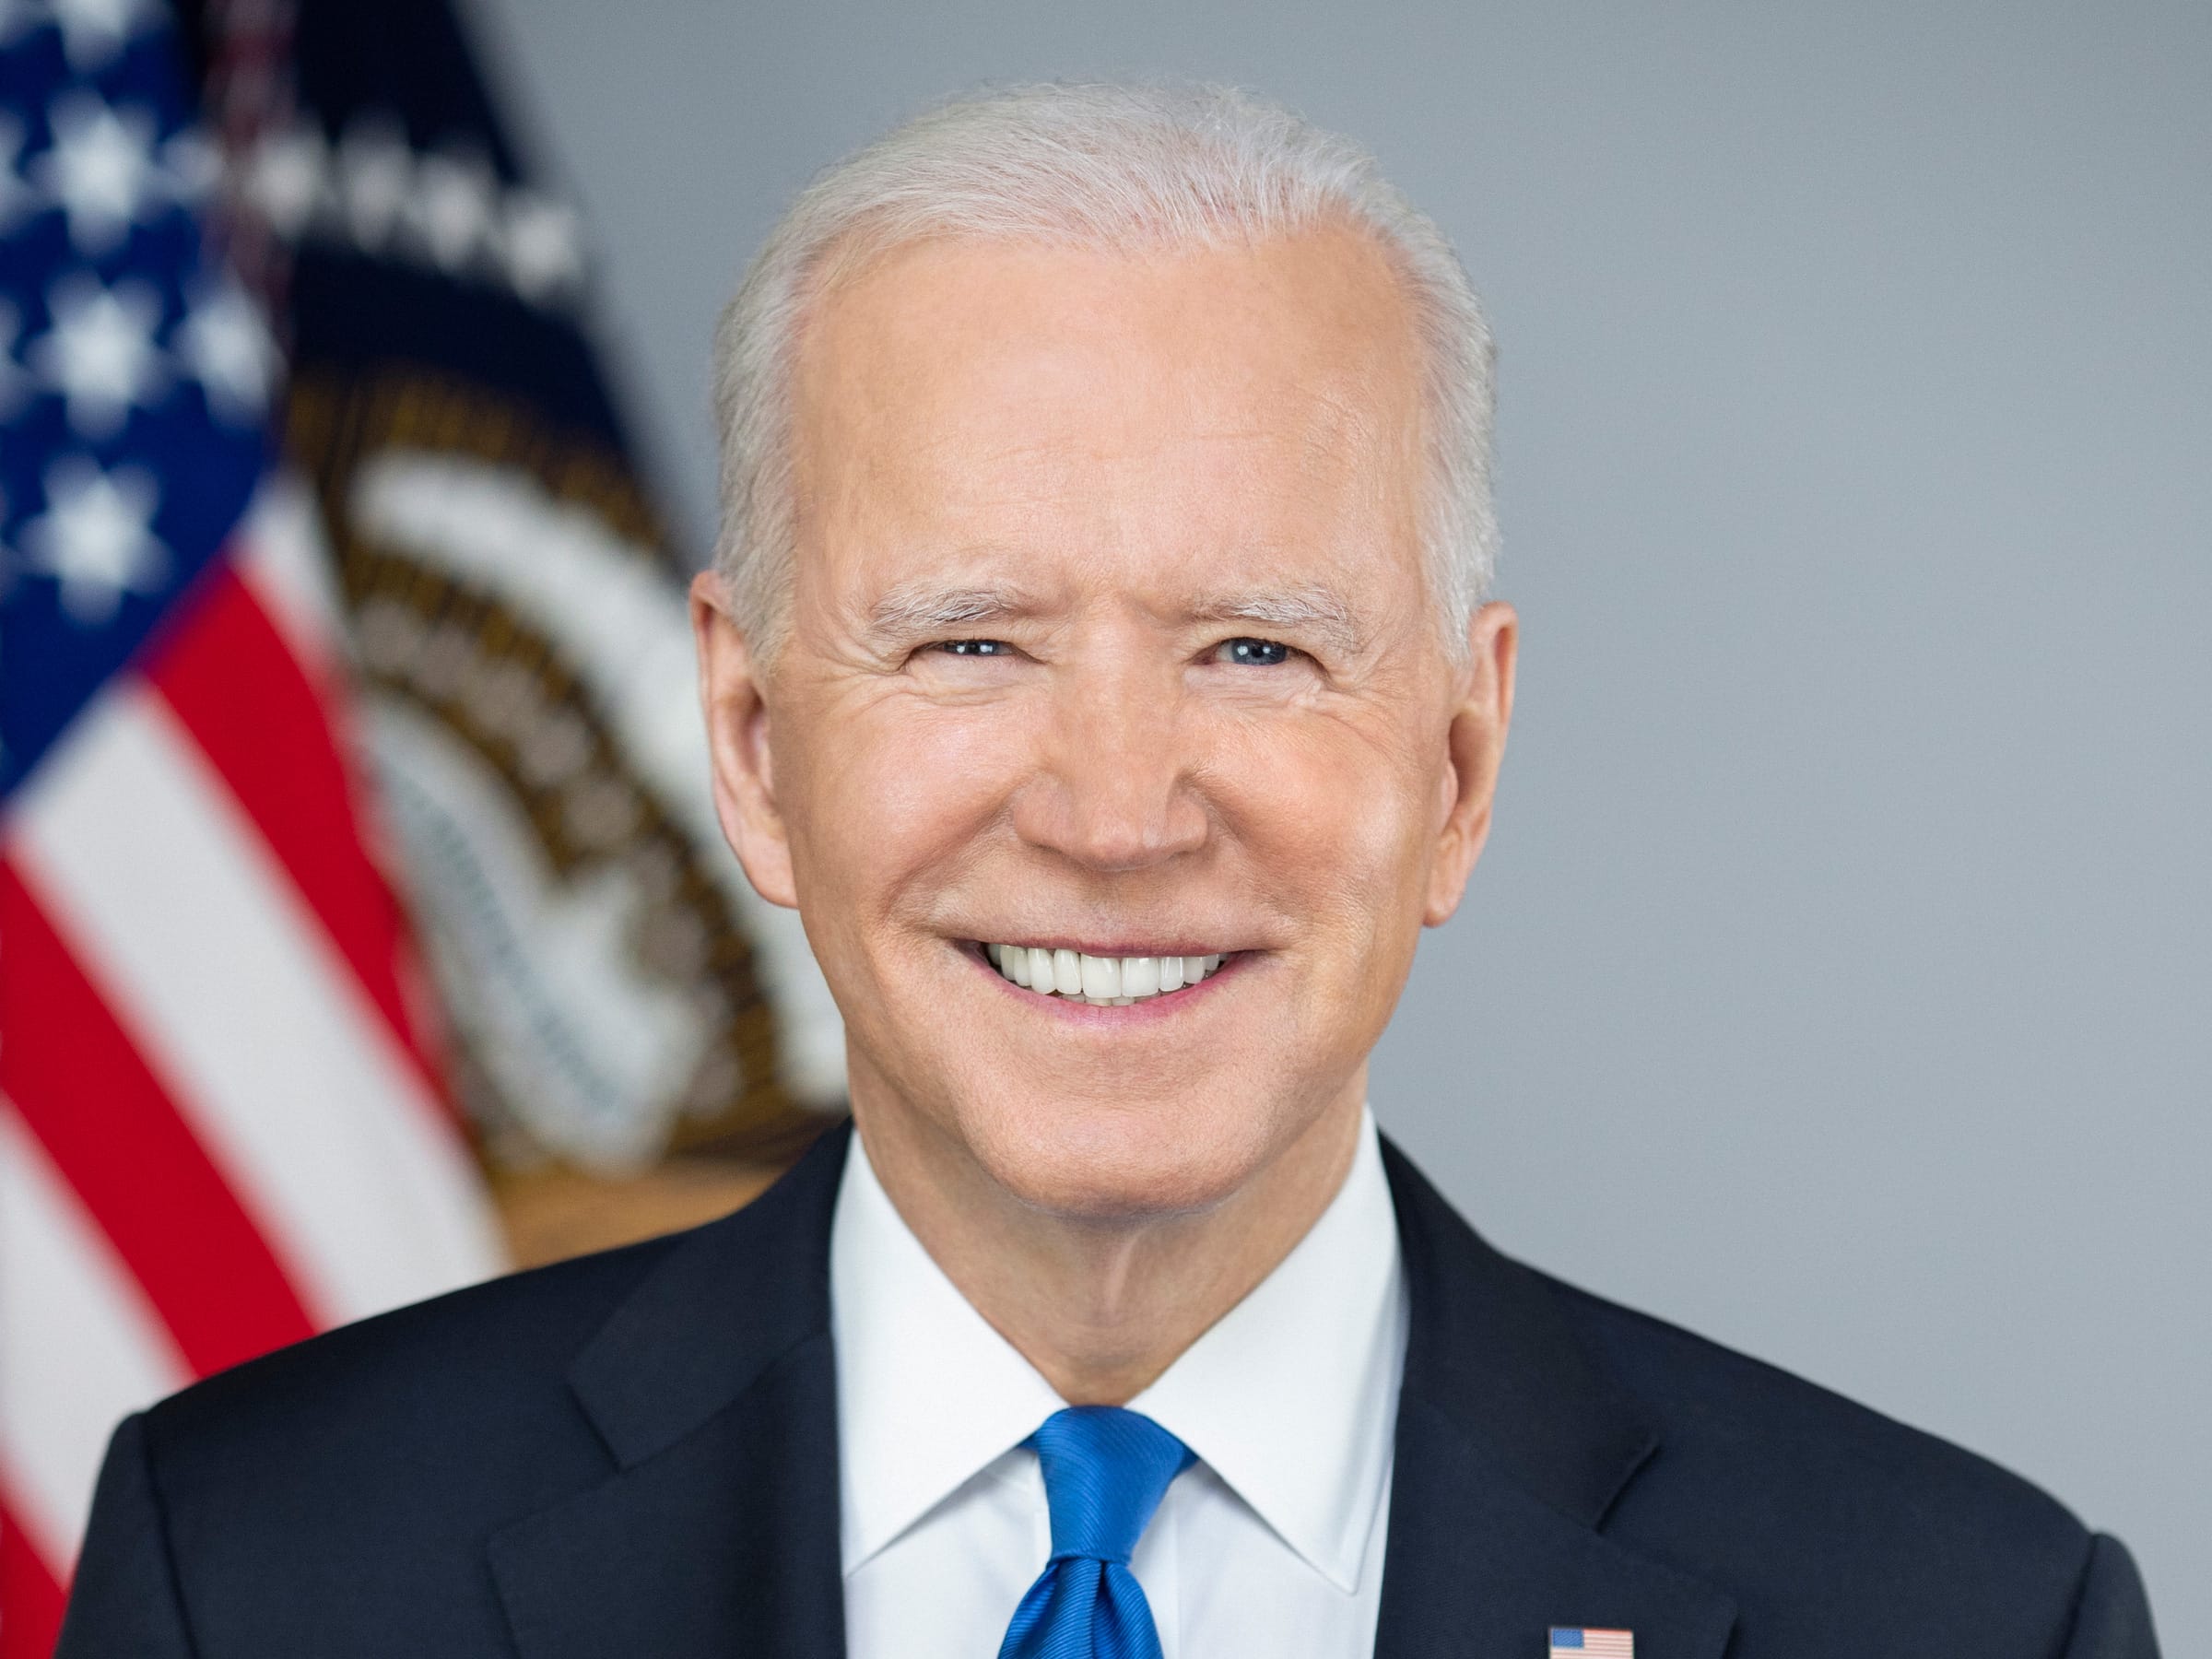 Biden makes plans to visit Africa if re-elected